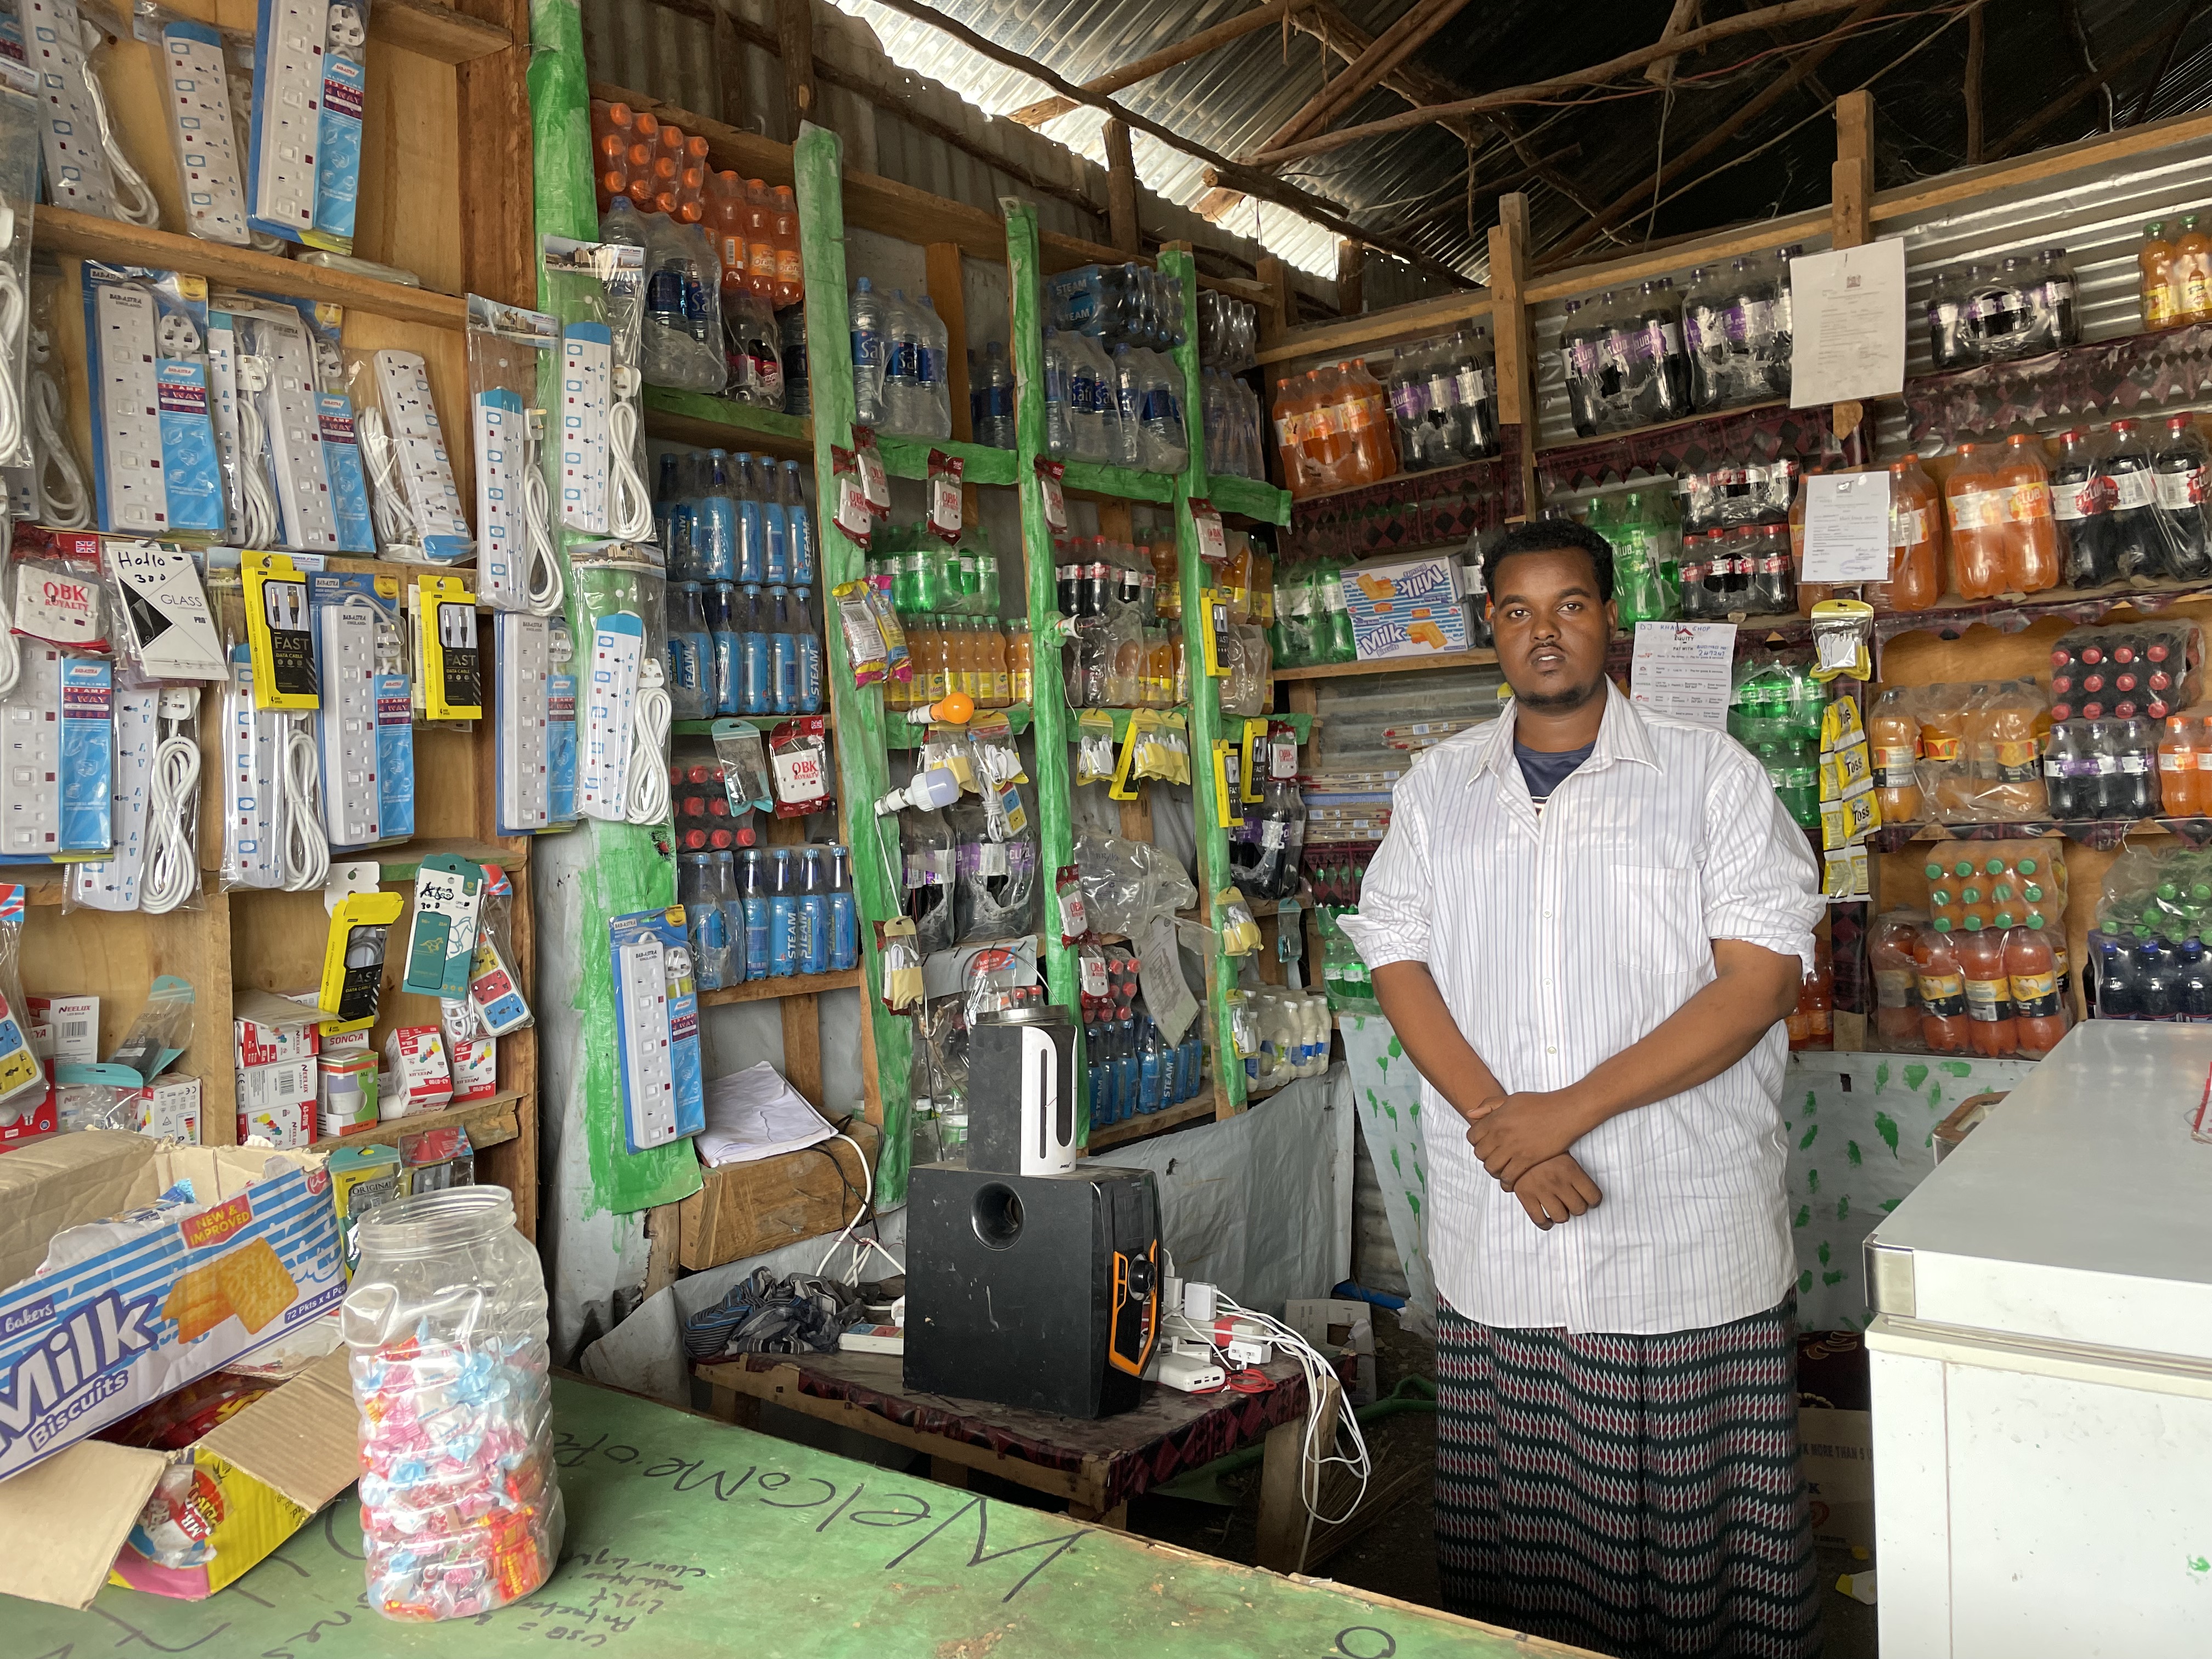 A man wearing a white button-up stands in a shop with phone accessories and drinks on the shelves